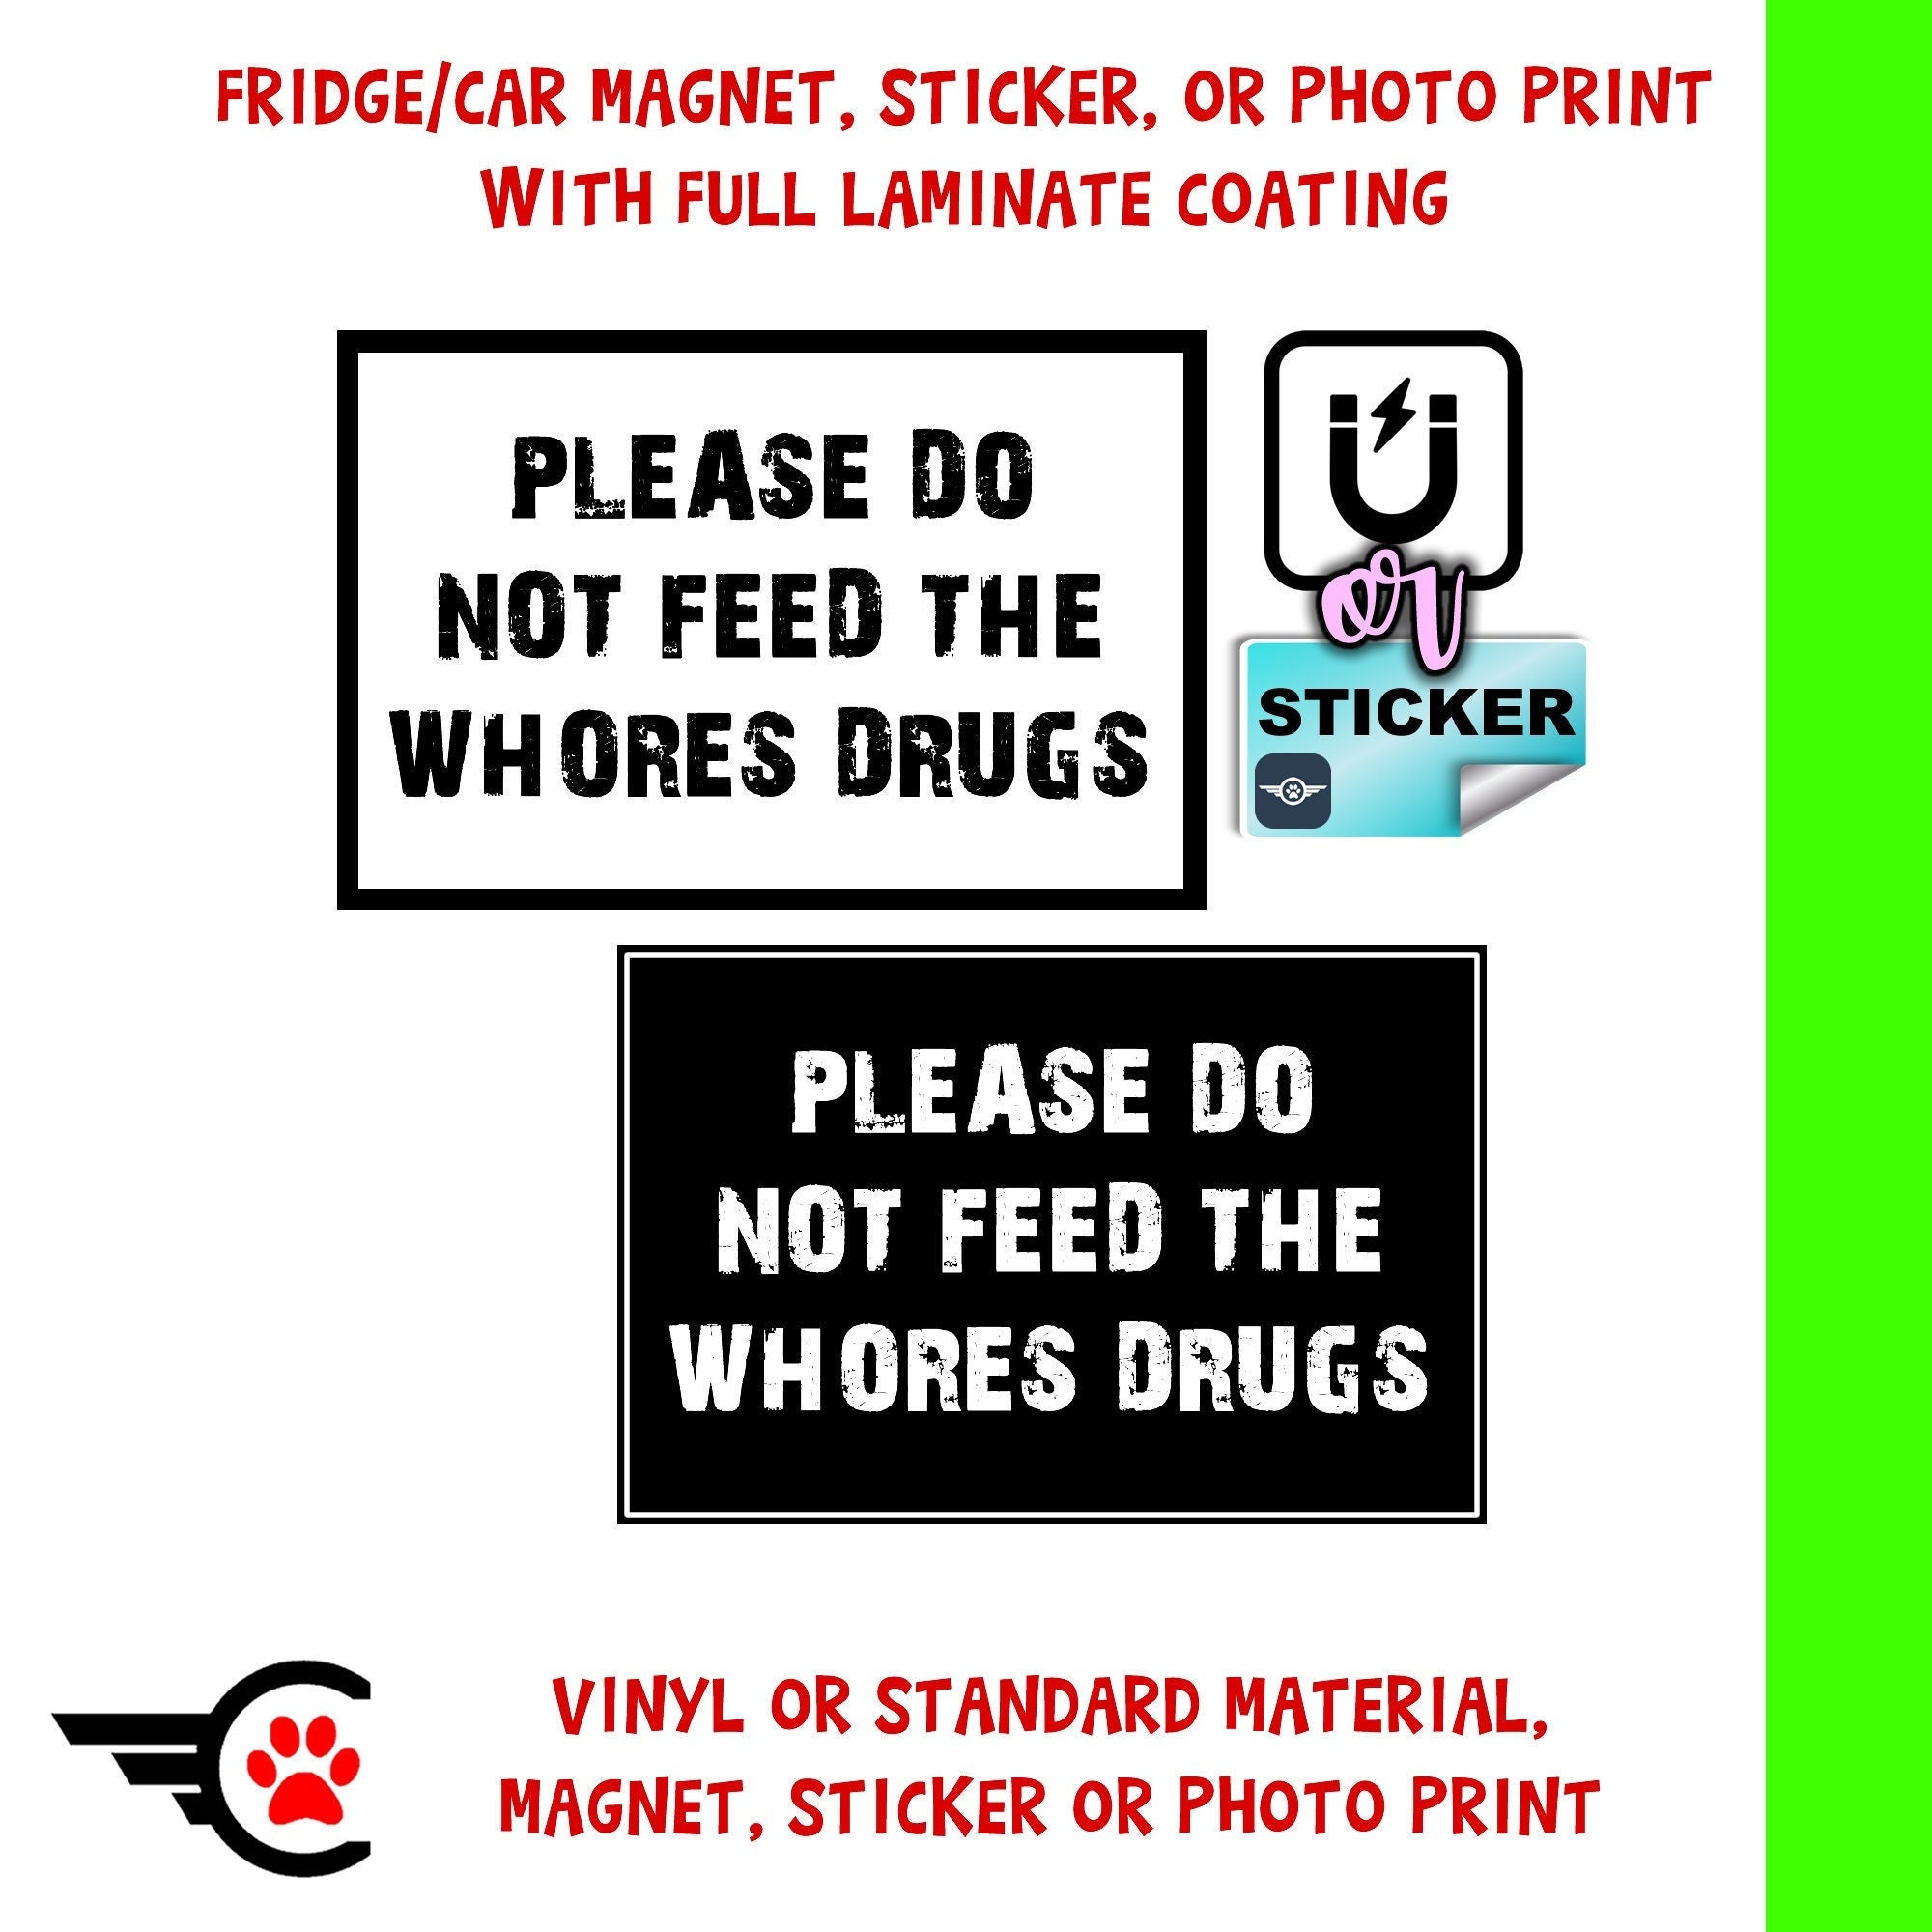 Please Do Not Feed The Whores Drugs Sticker, Magnet or Photo Print with full laminate coating